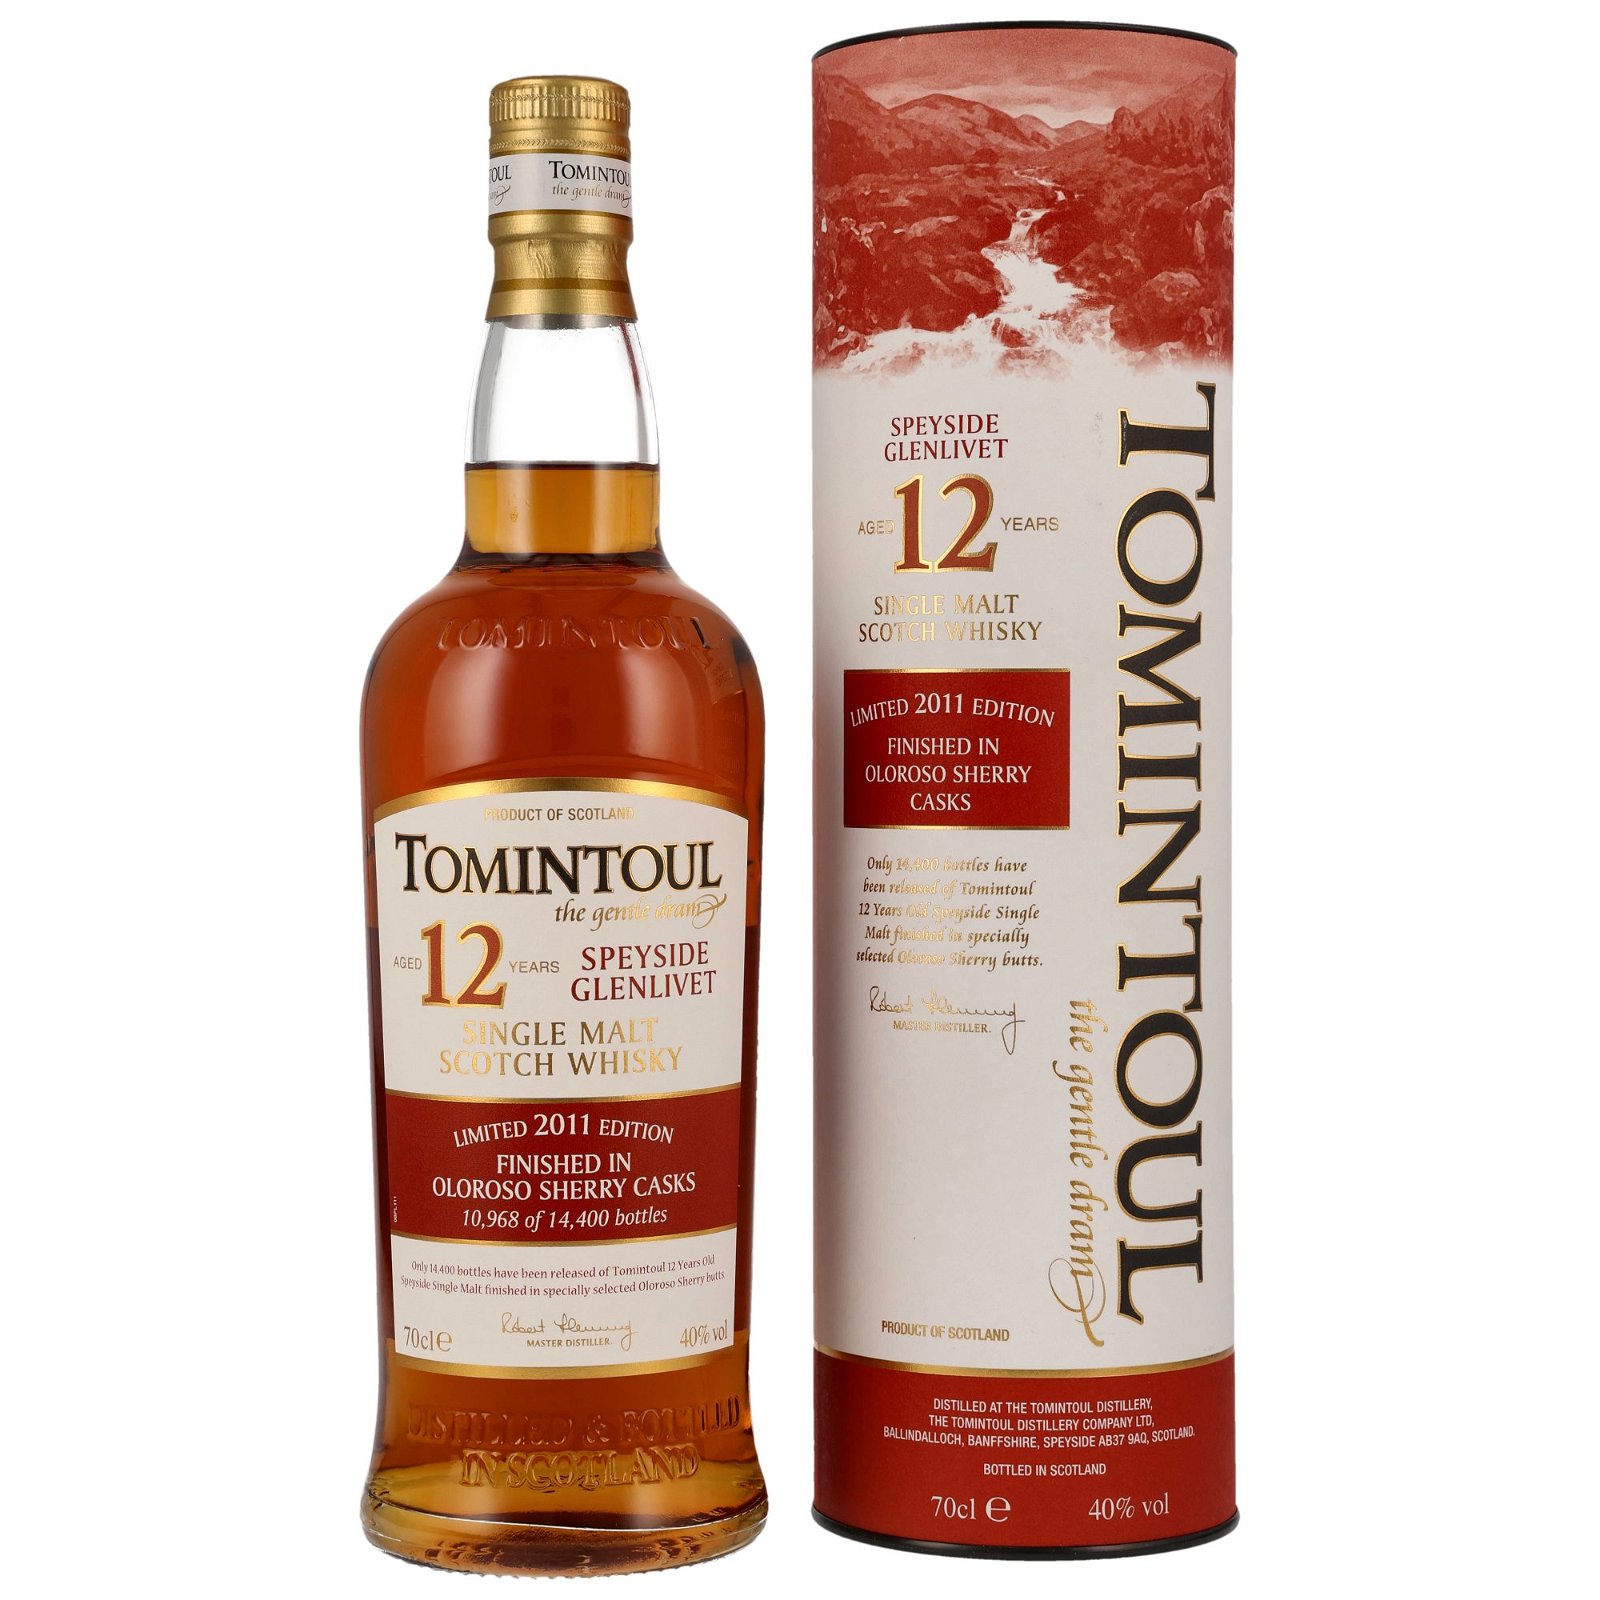 Tomintoul 12 Jahre Oloroso Sherry Cask Finish 2011 Edition